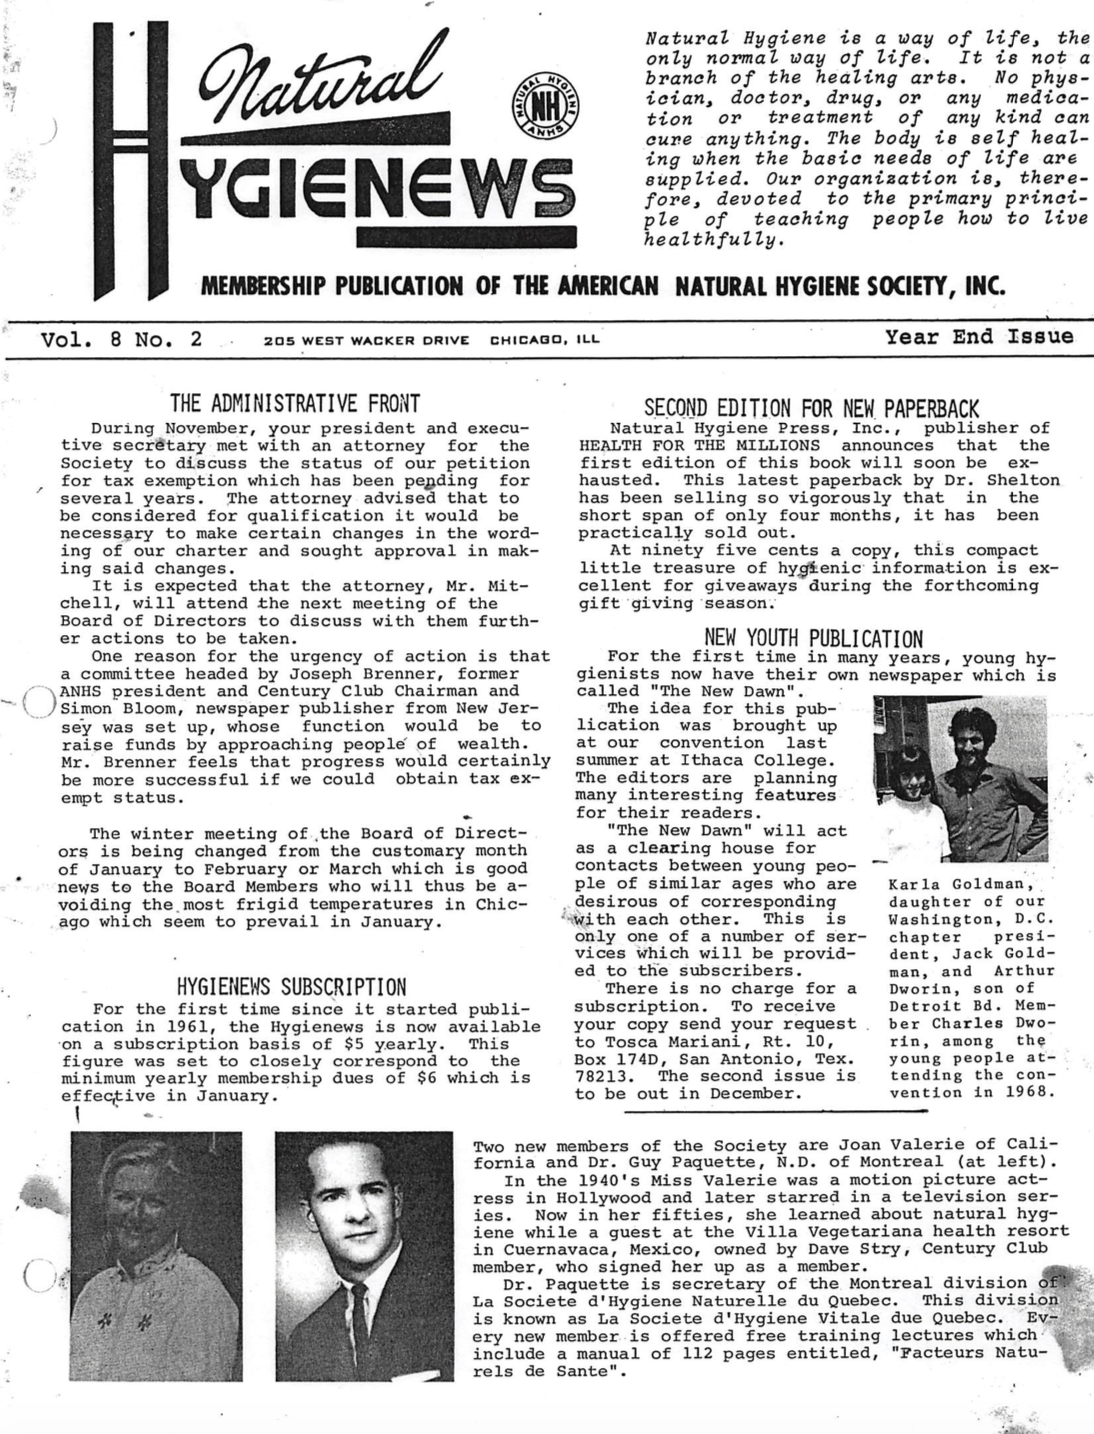 Year End Issue 1968